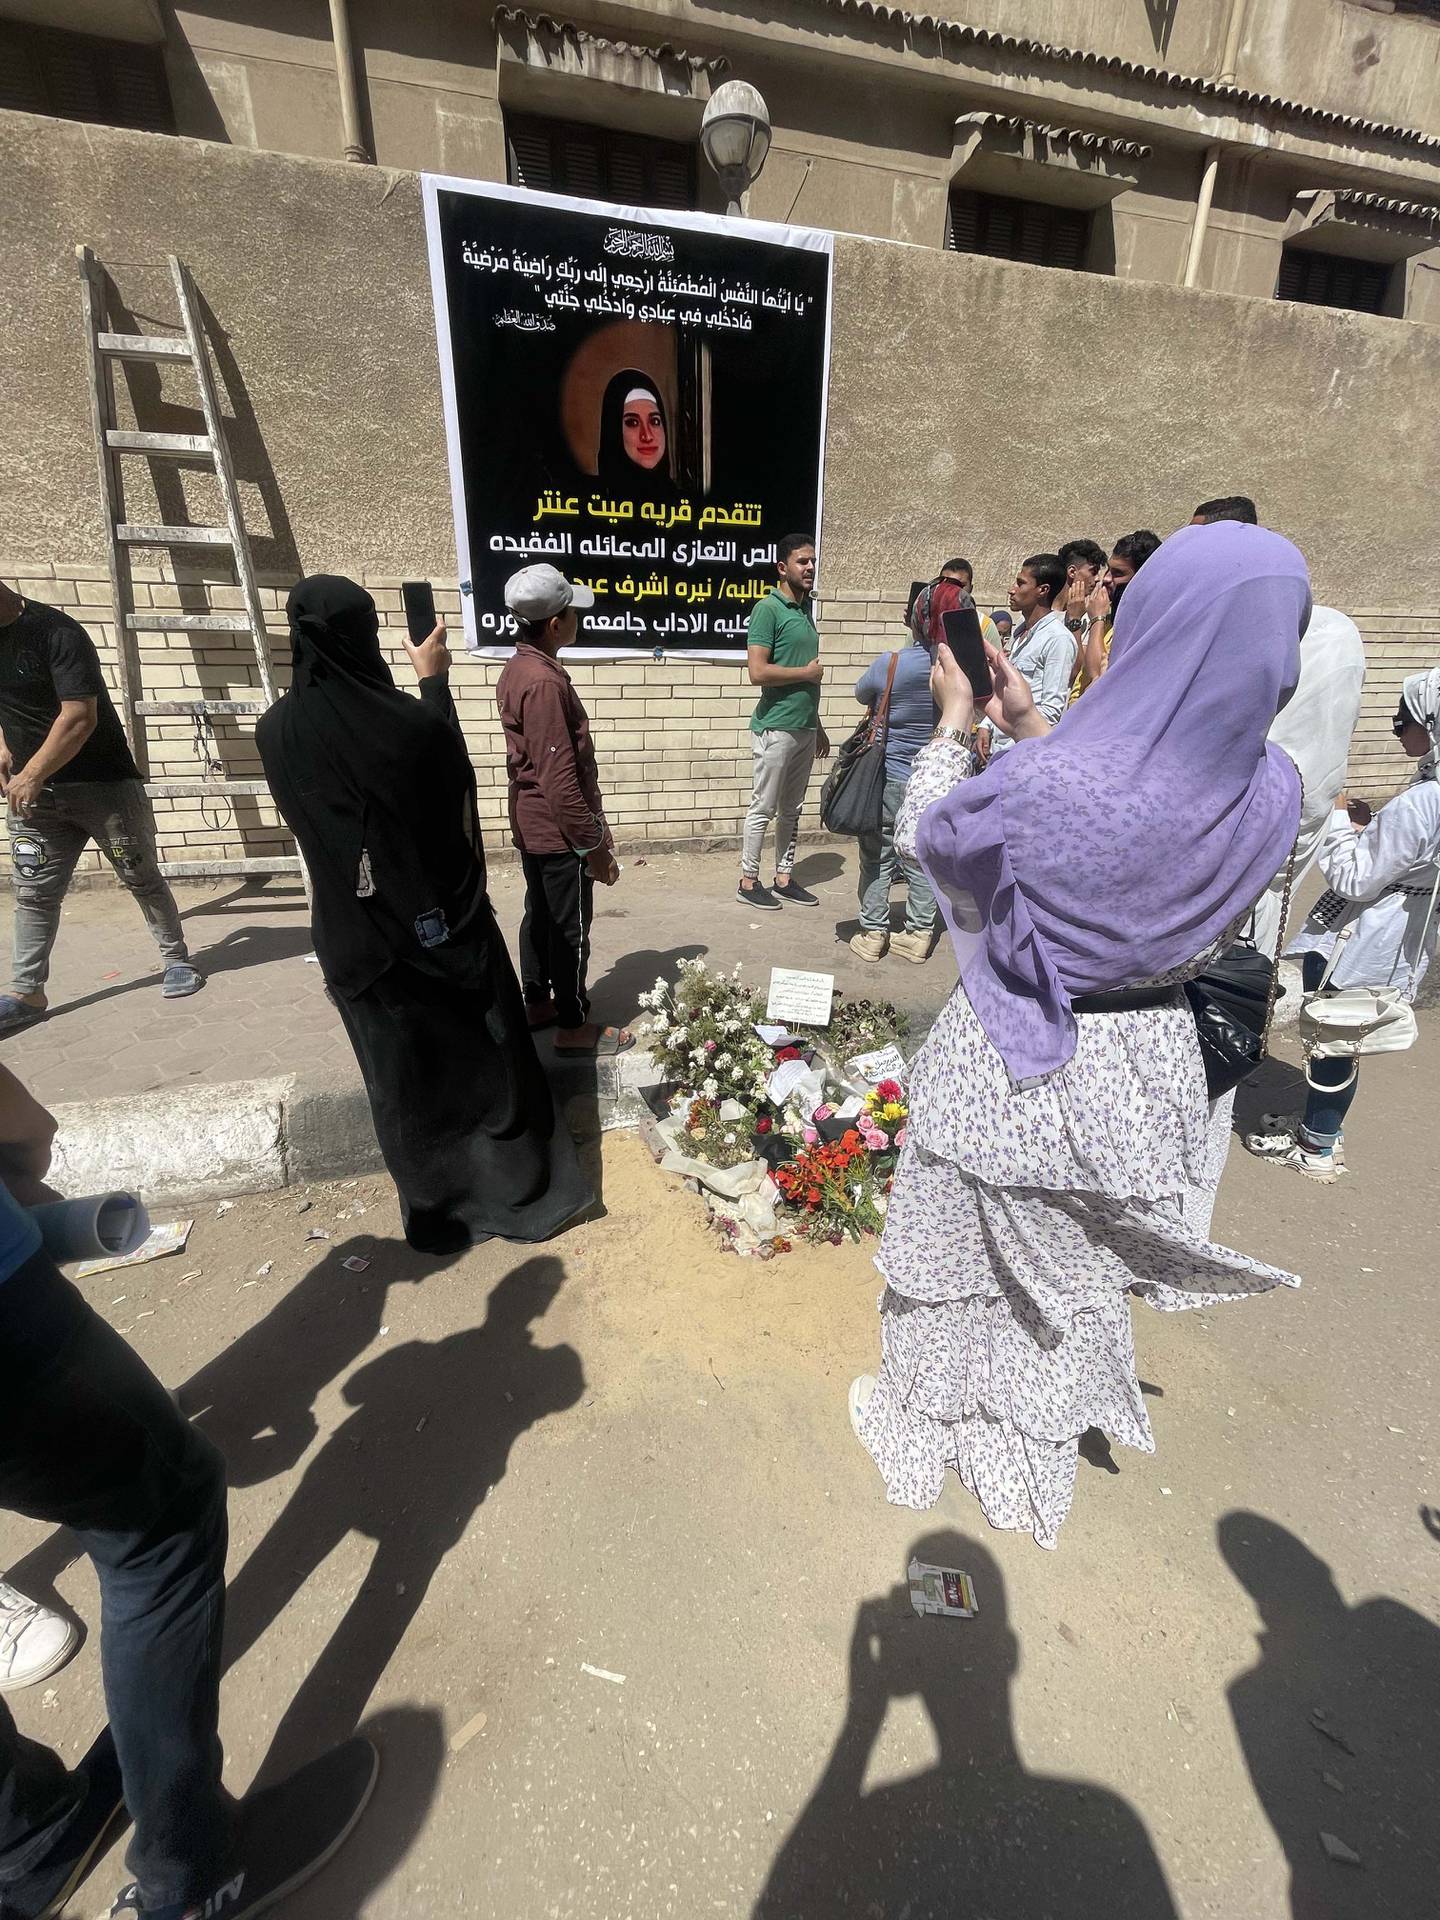 Residents of the Egyptian city of Mansoura view a poster in memory of 21-year-old literature student Nayera Ashraf who was murdered outside the university gate on Monday, June 20. Kamal Tabikha / The National